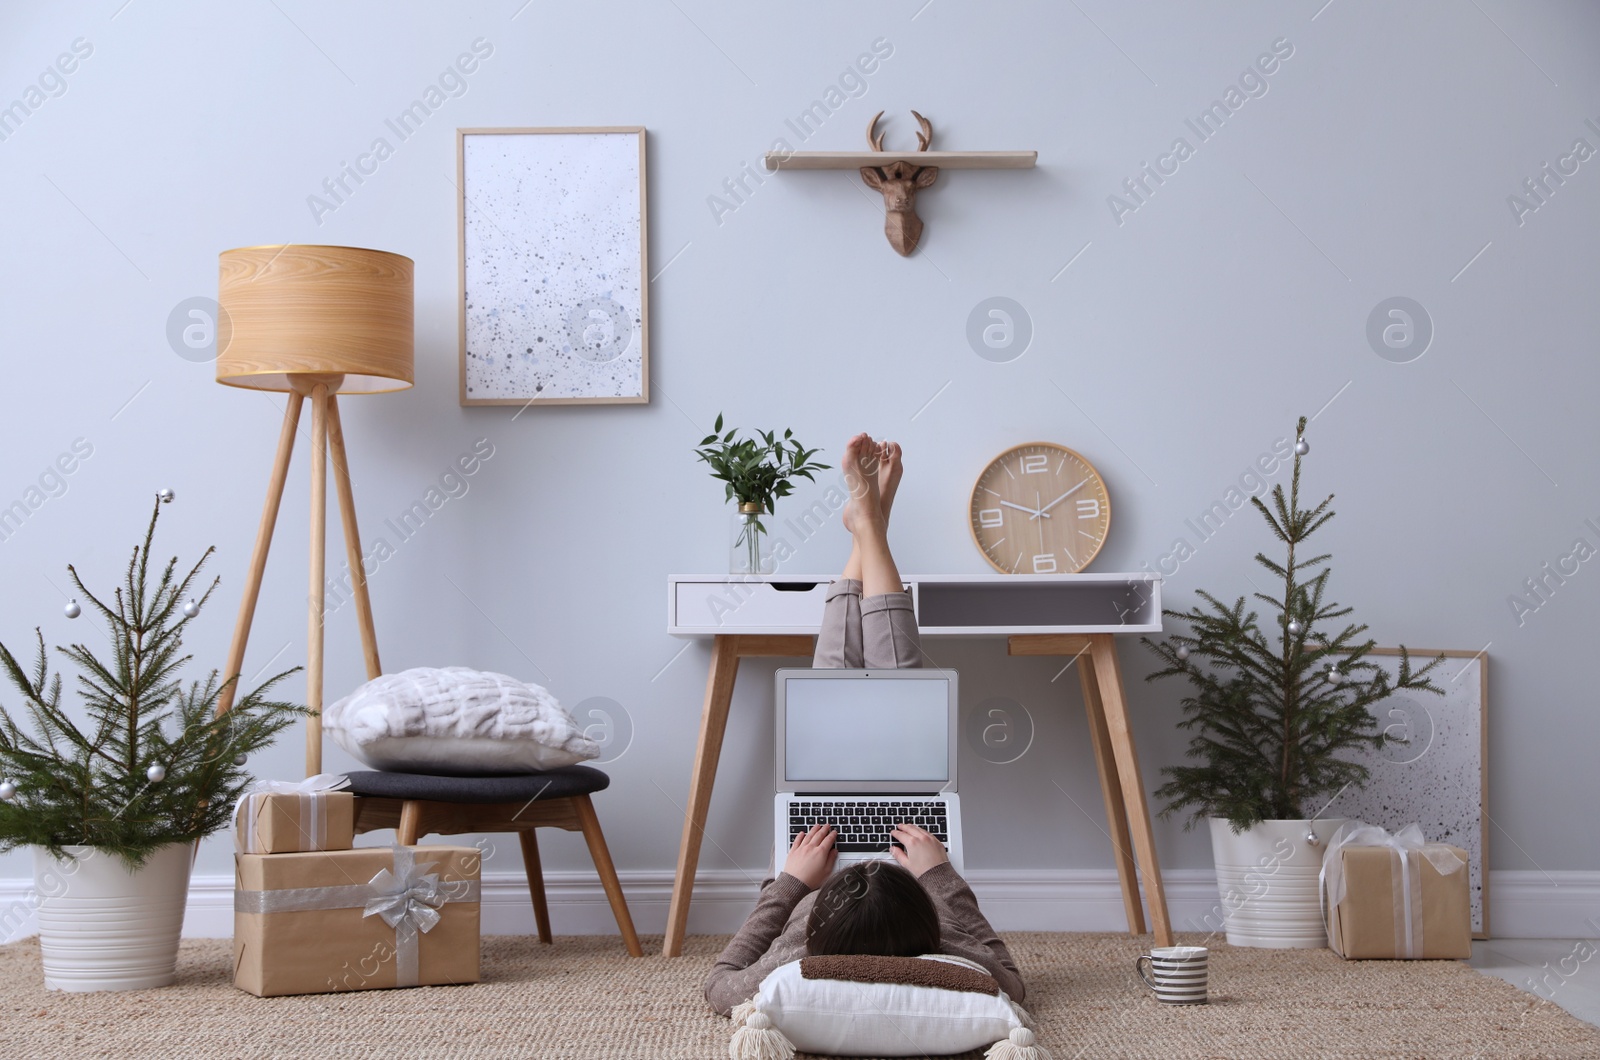 Photo of Woman using laptop in room decorated with potted fir trees